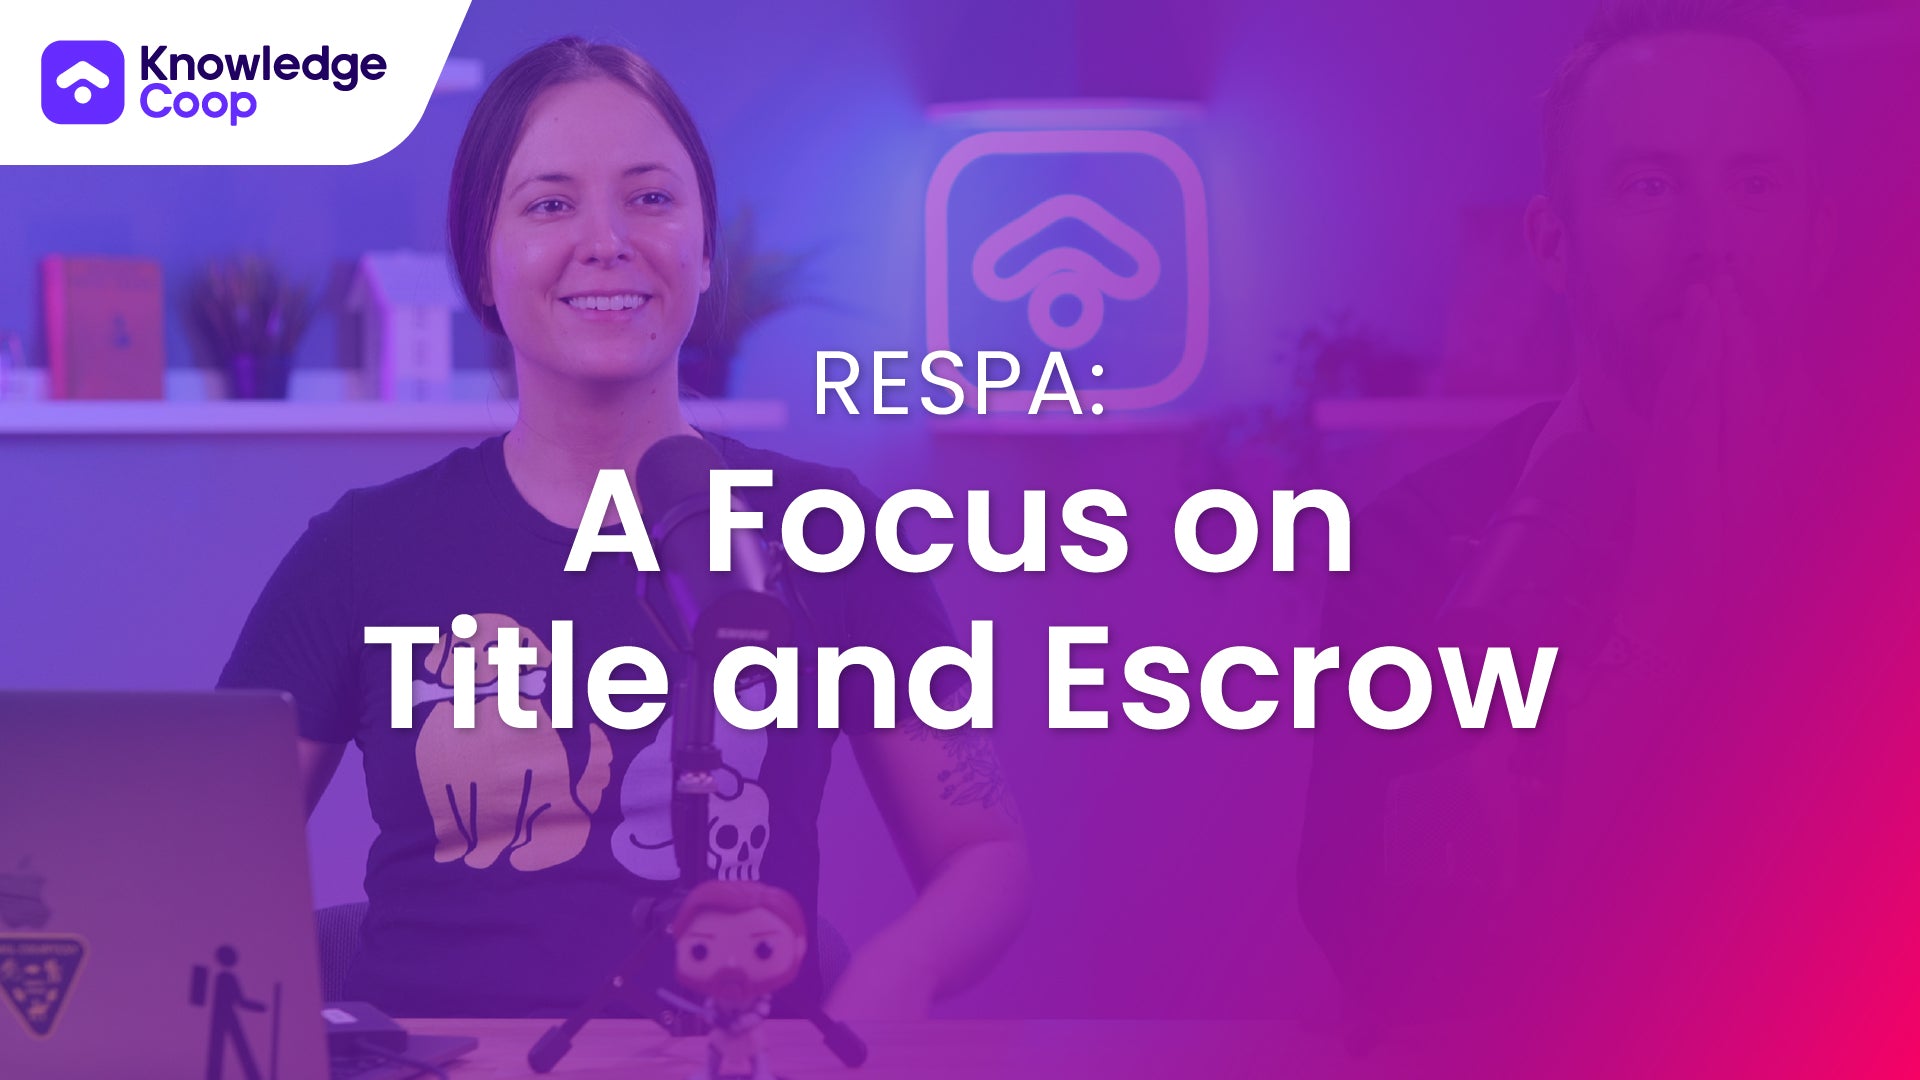 RESPA: A Focus on Title and Escrow